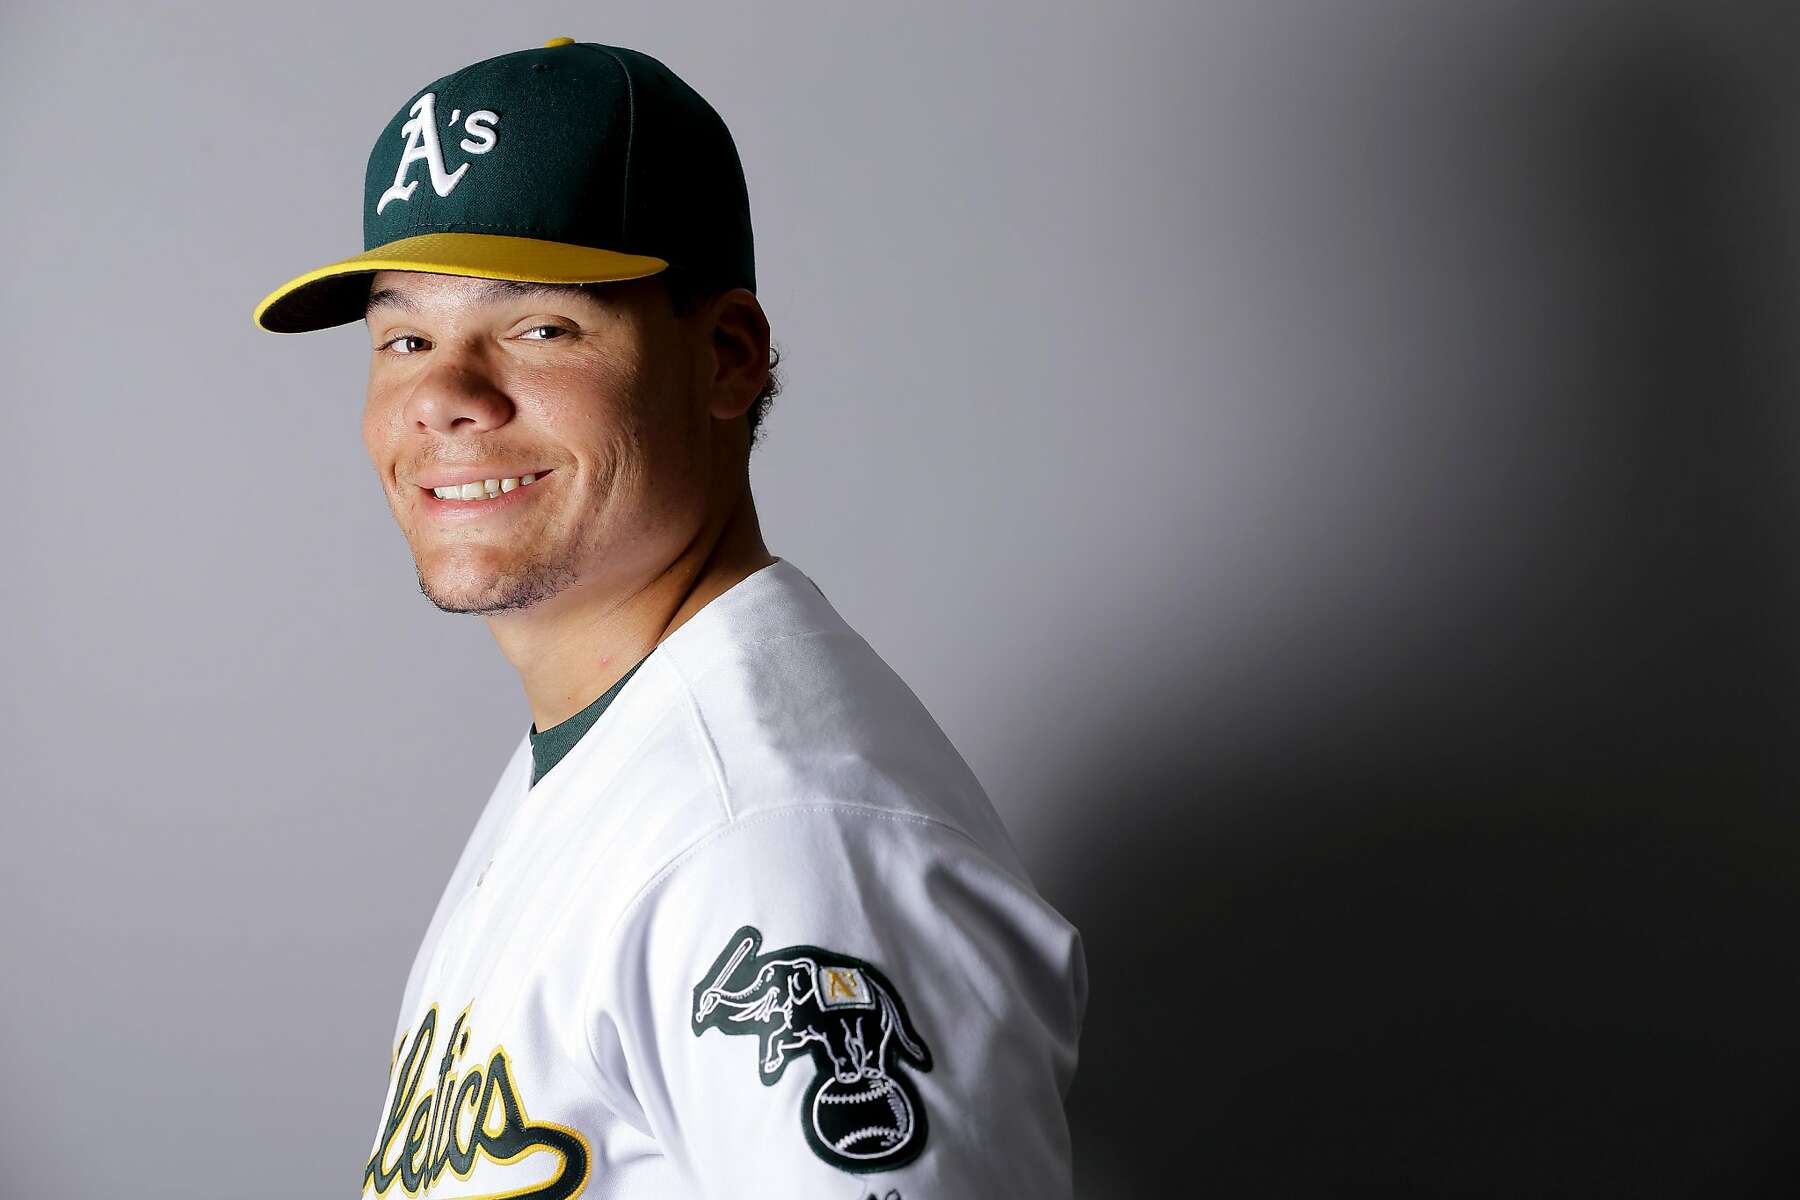 The A's showed love to their Oakland neighbors with Warriors-colored  batting practice jerseys